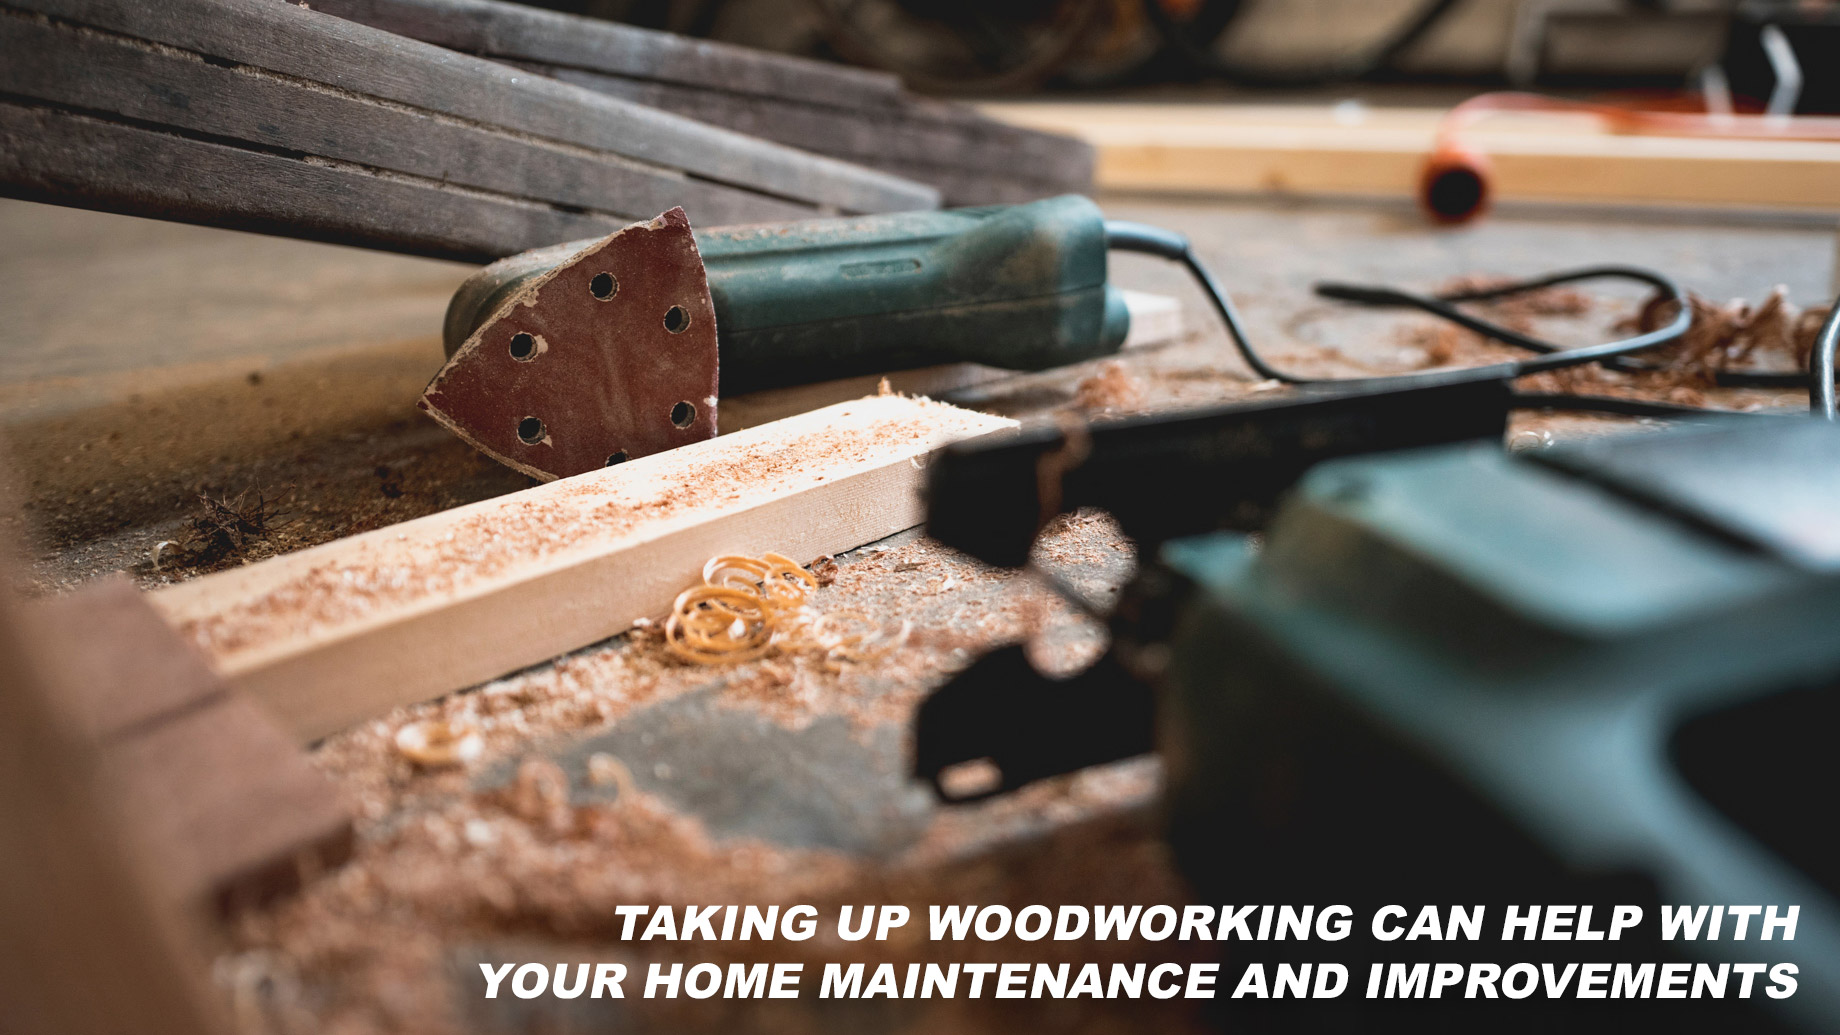 Taking Up Woodworking Can Help with Your Home Maintenance and Improvements